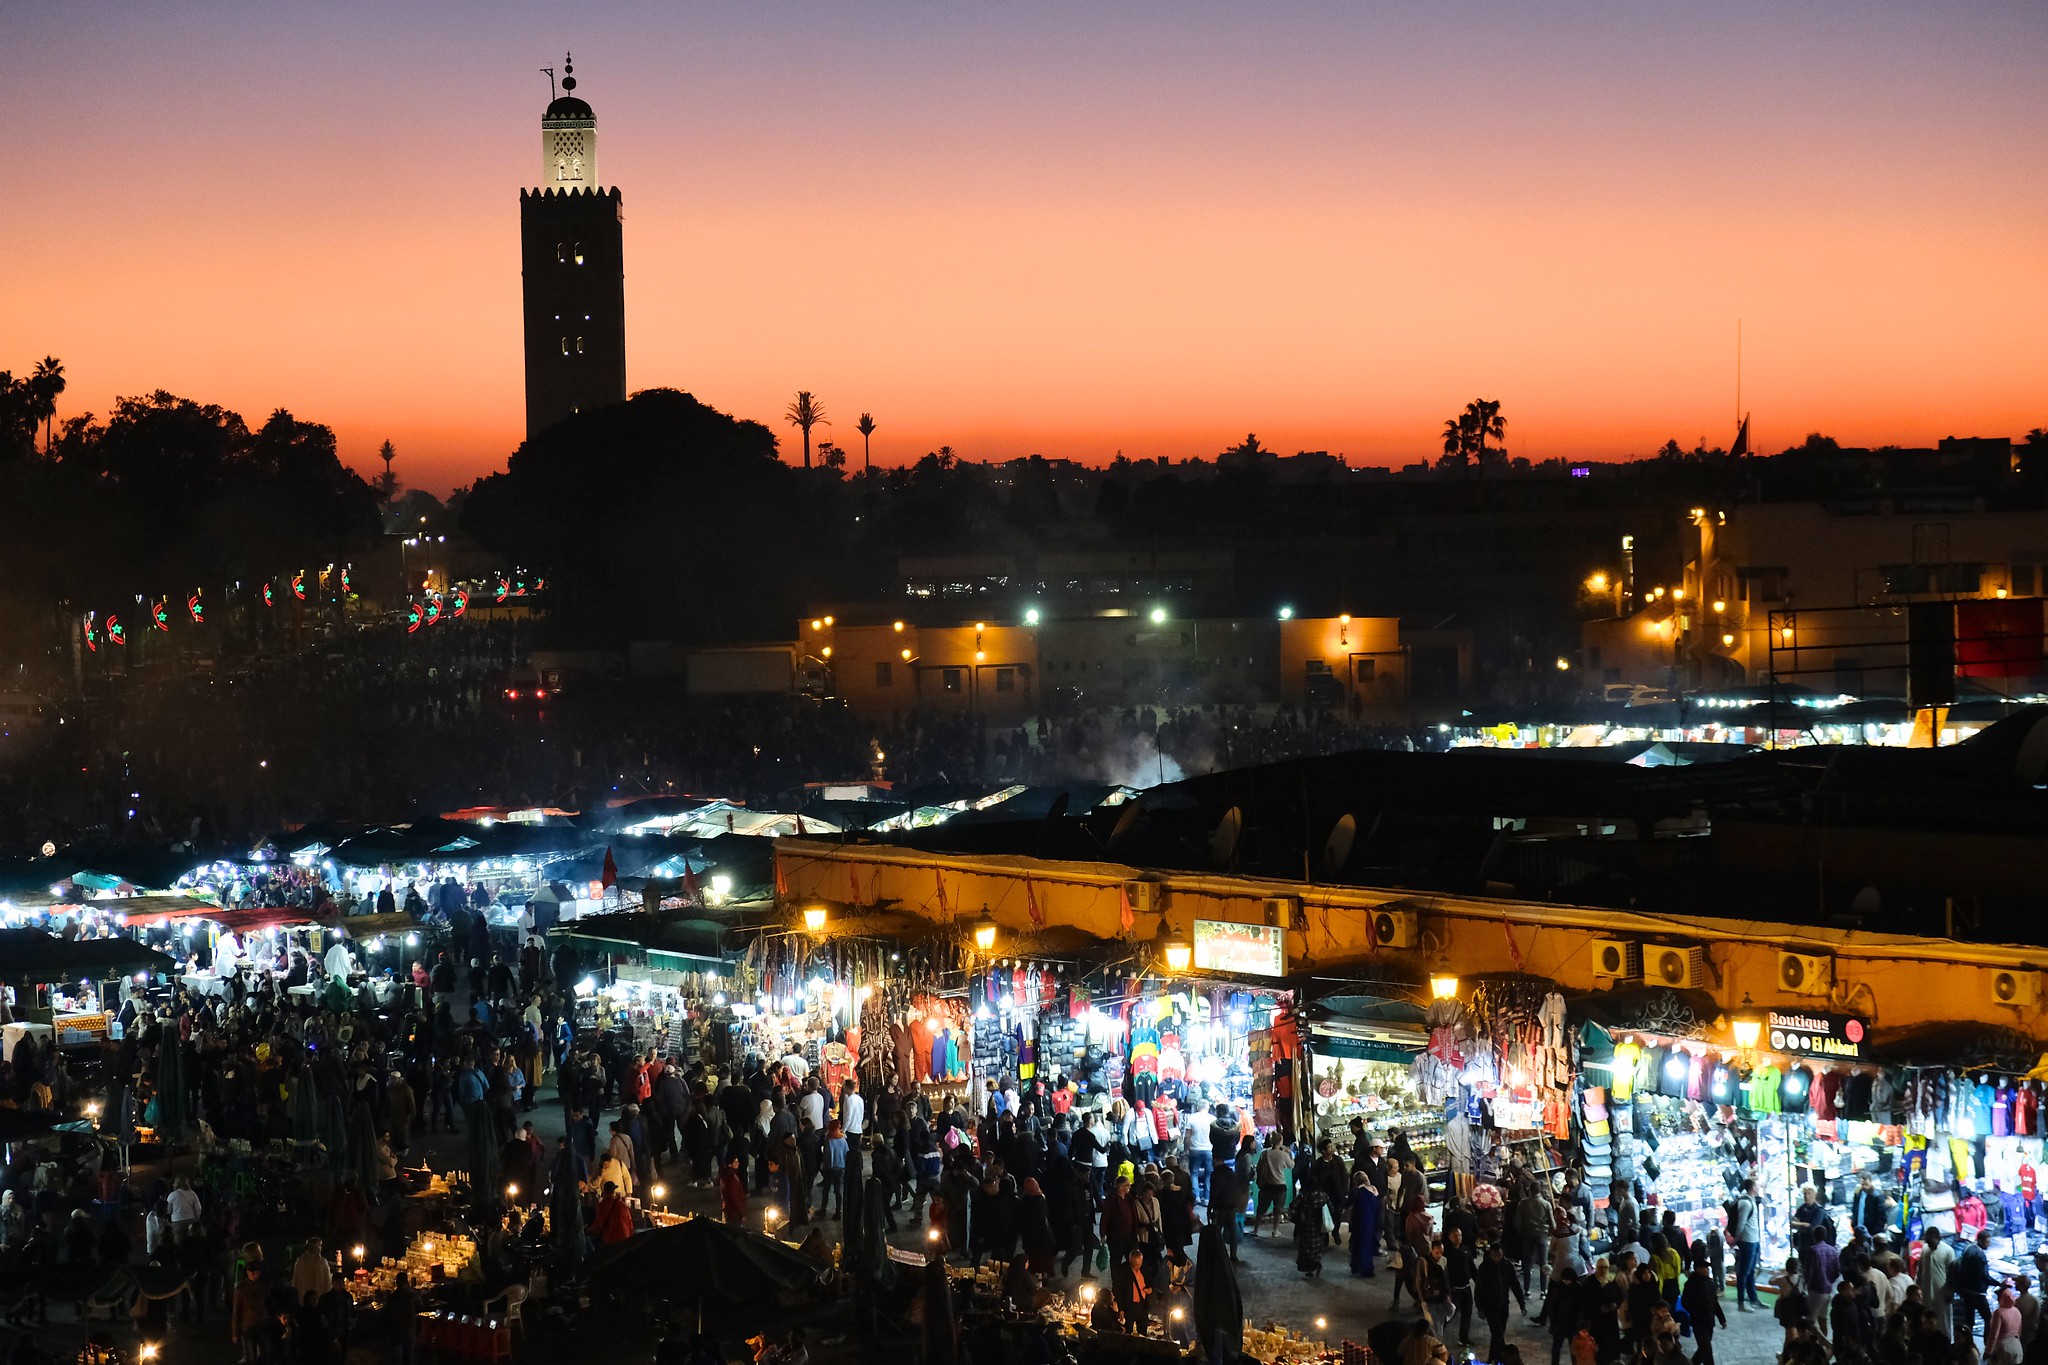 vibrant culture and rich traditions of Morocco